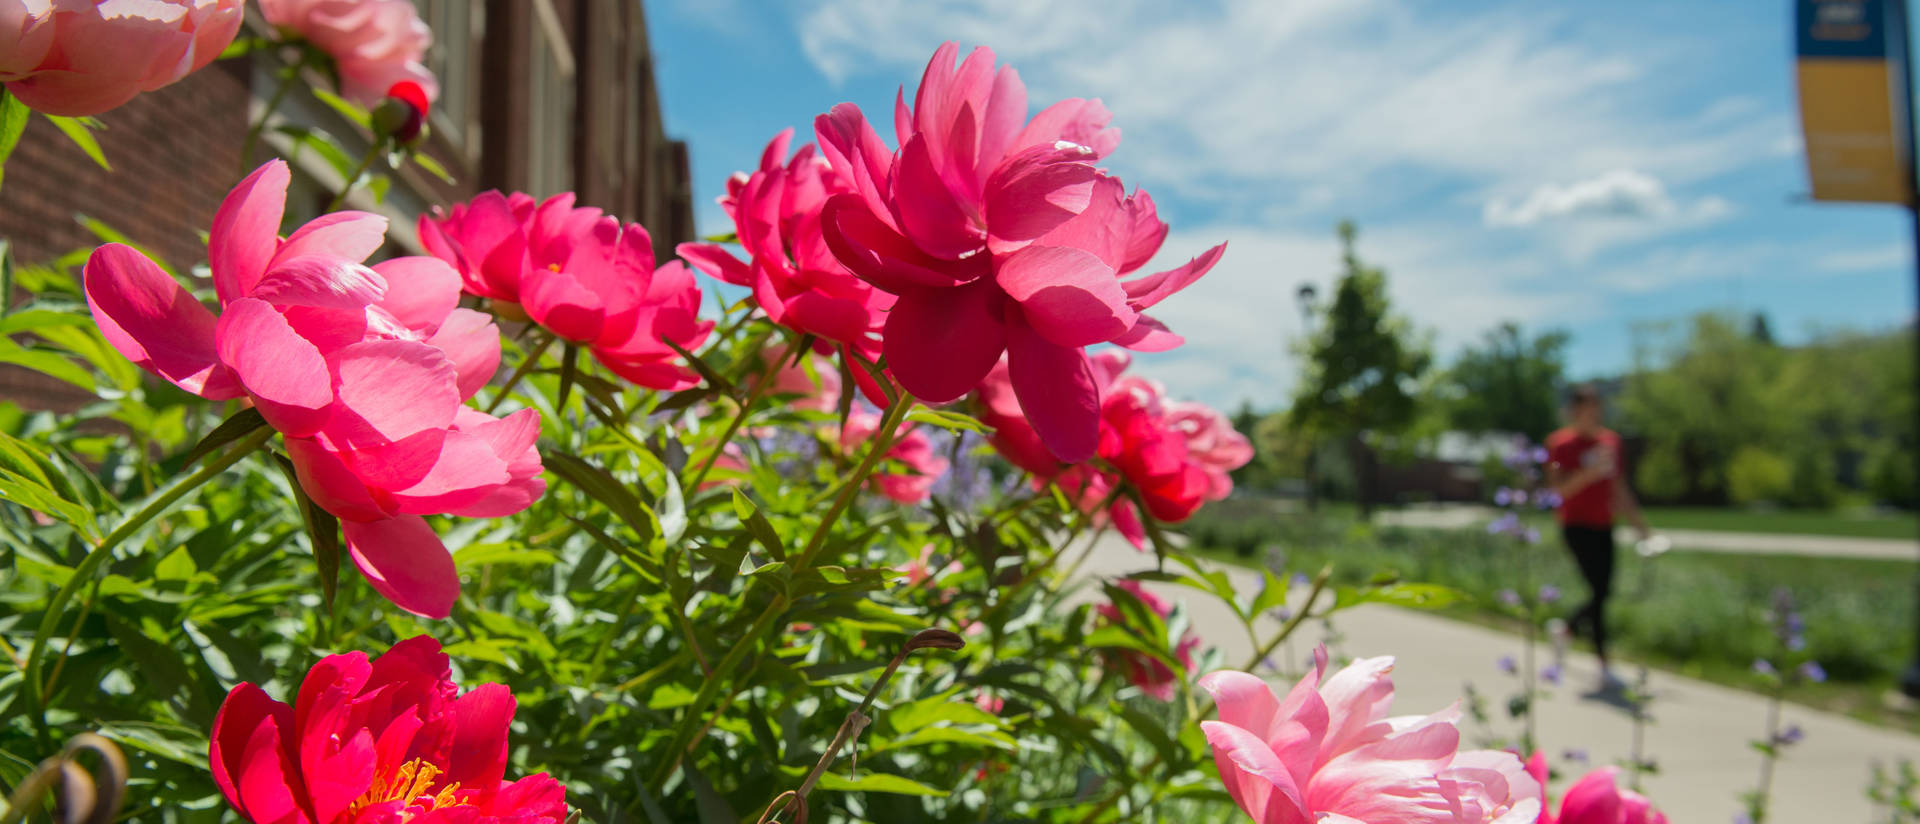 Pink peonies grace this beautiful spring day on the UW-Eau Claire campus.